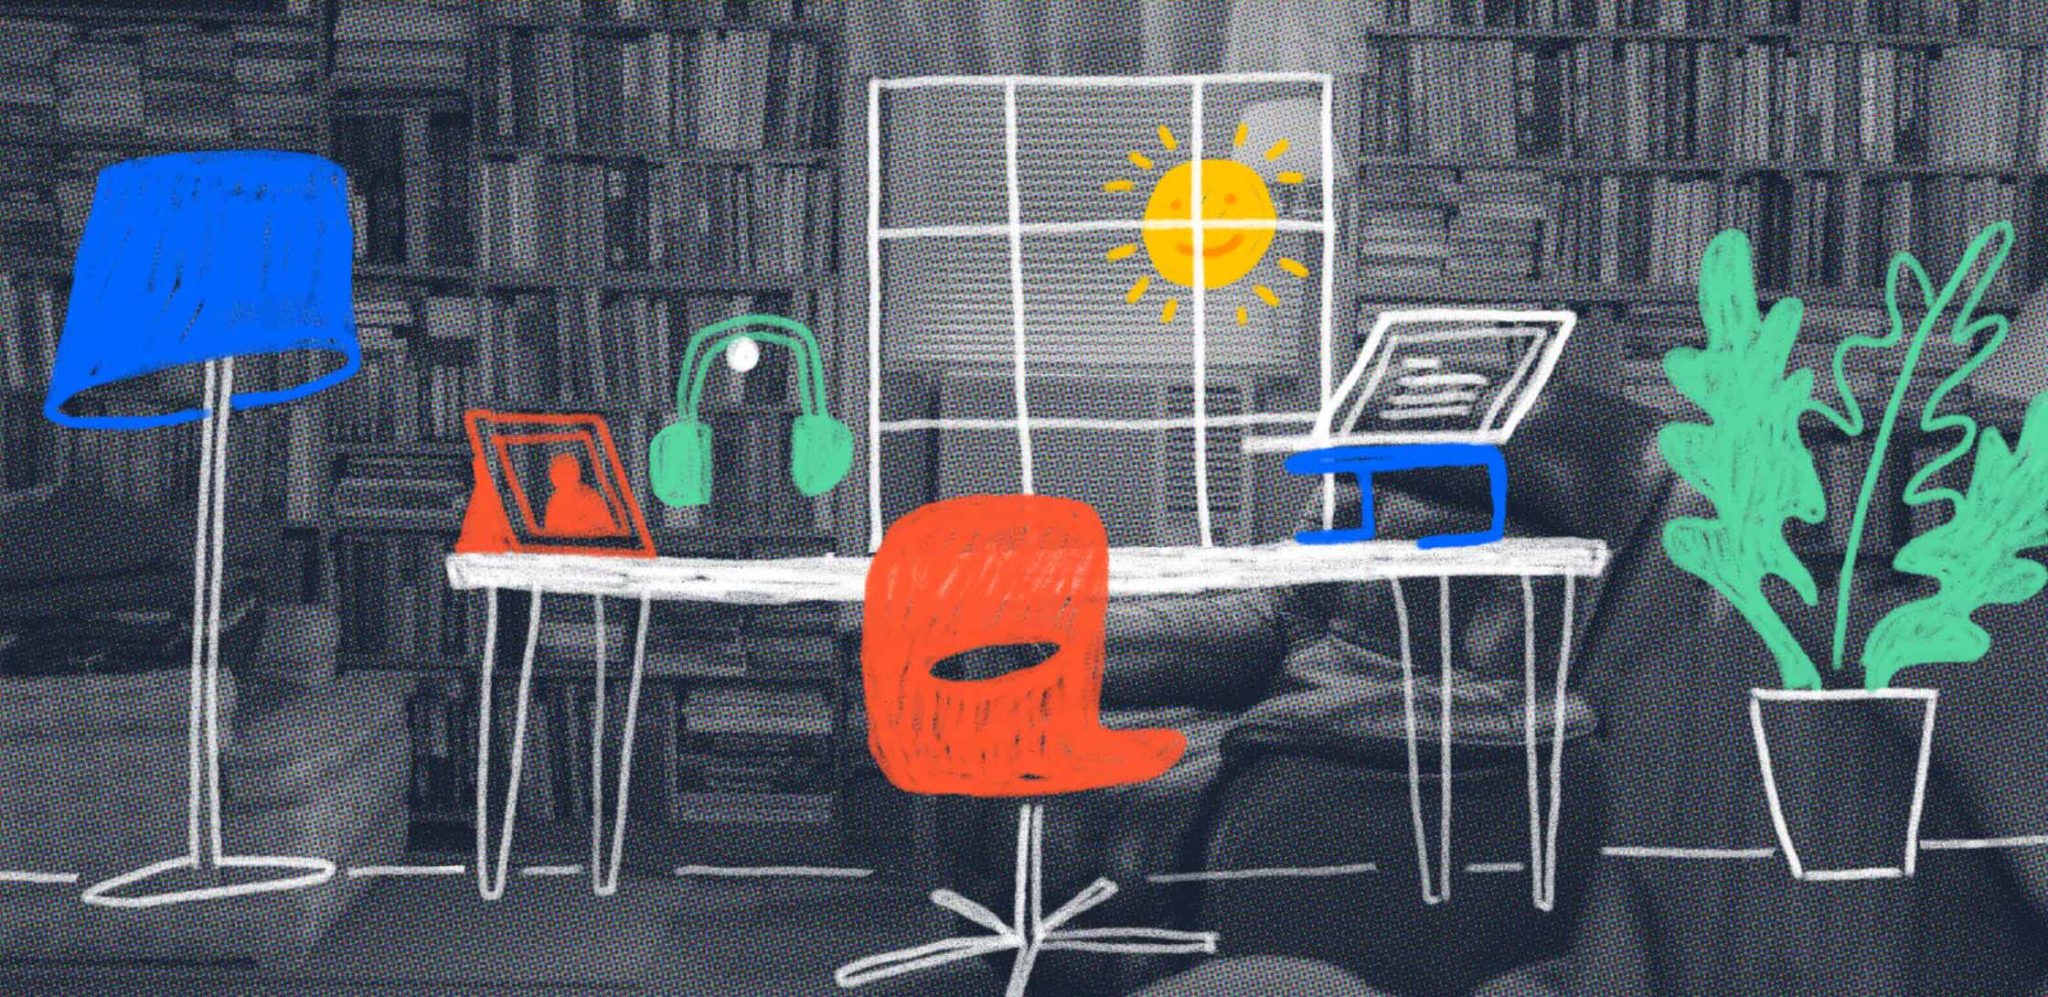 Expert tips for setting up an ergonomic home office your body will love -  Work Life by Atlassian